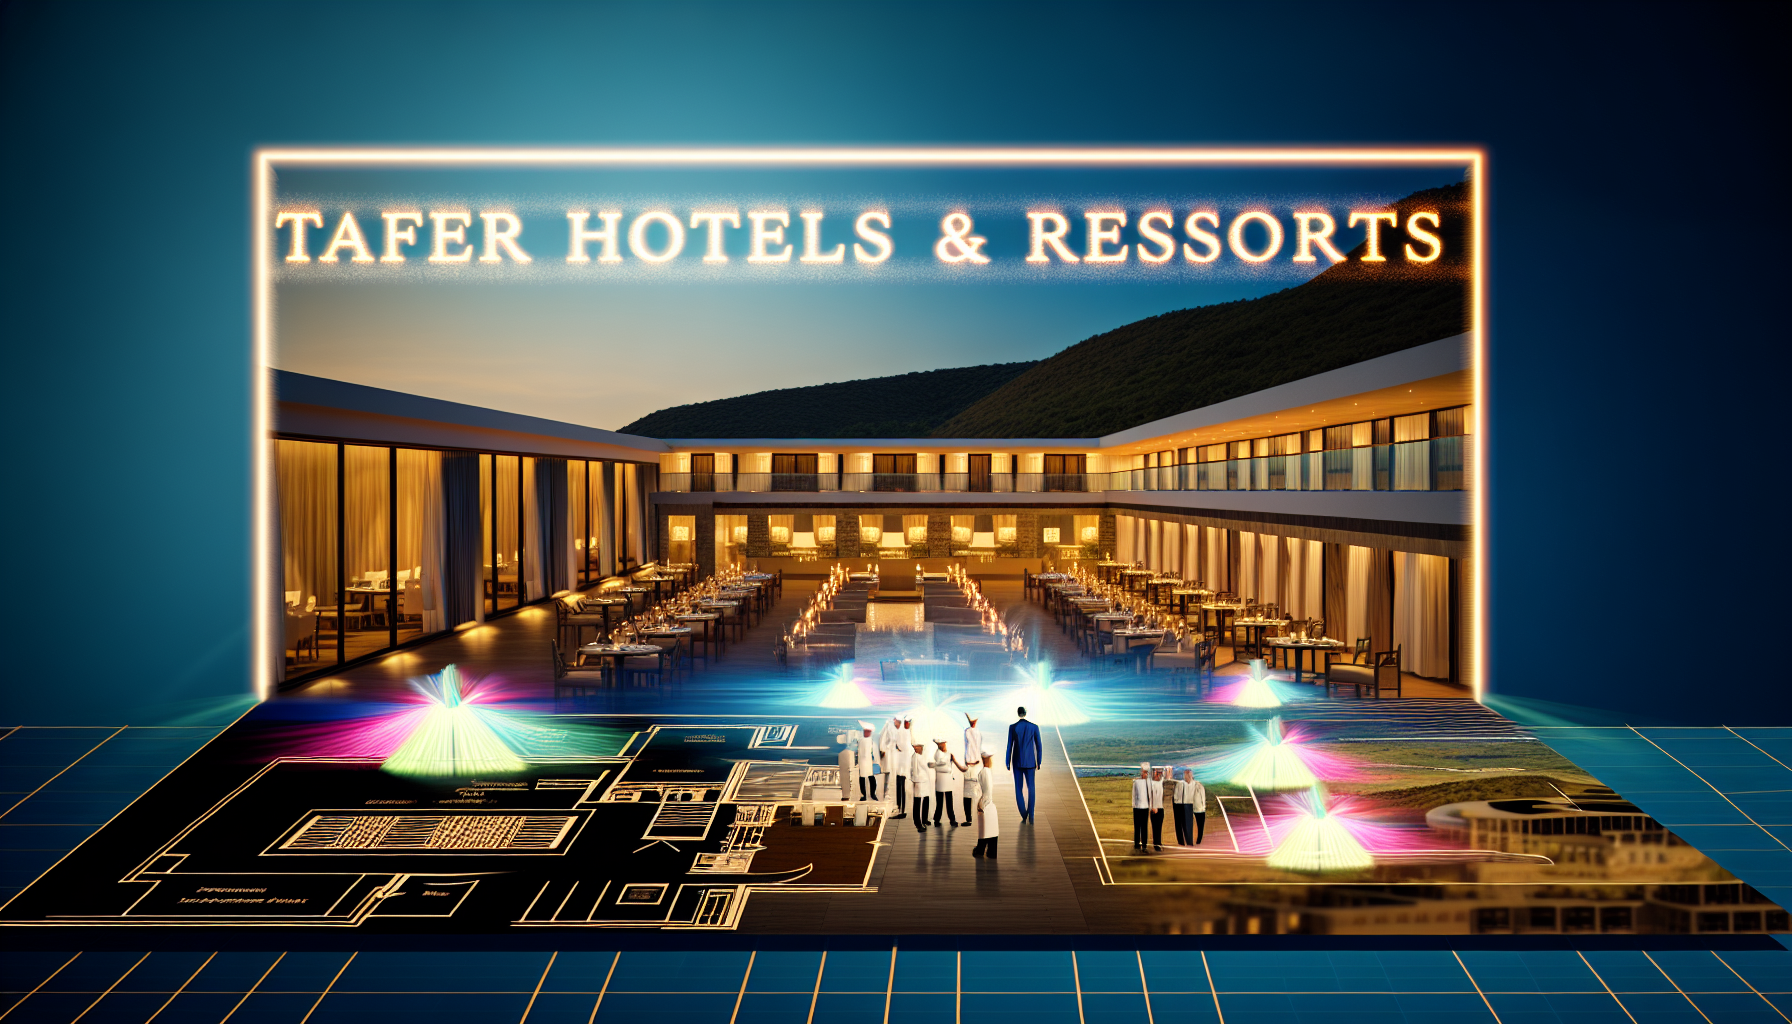 Tafer hotels & resorts: amplifying hospitality with new management services and portfolio expansion